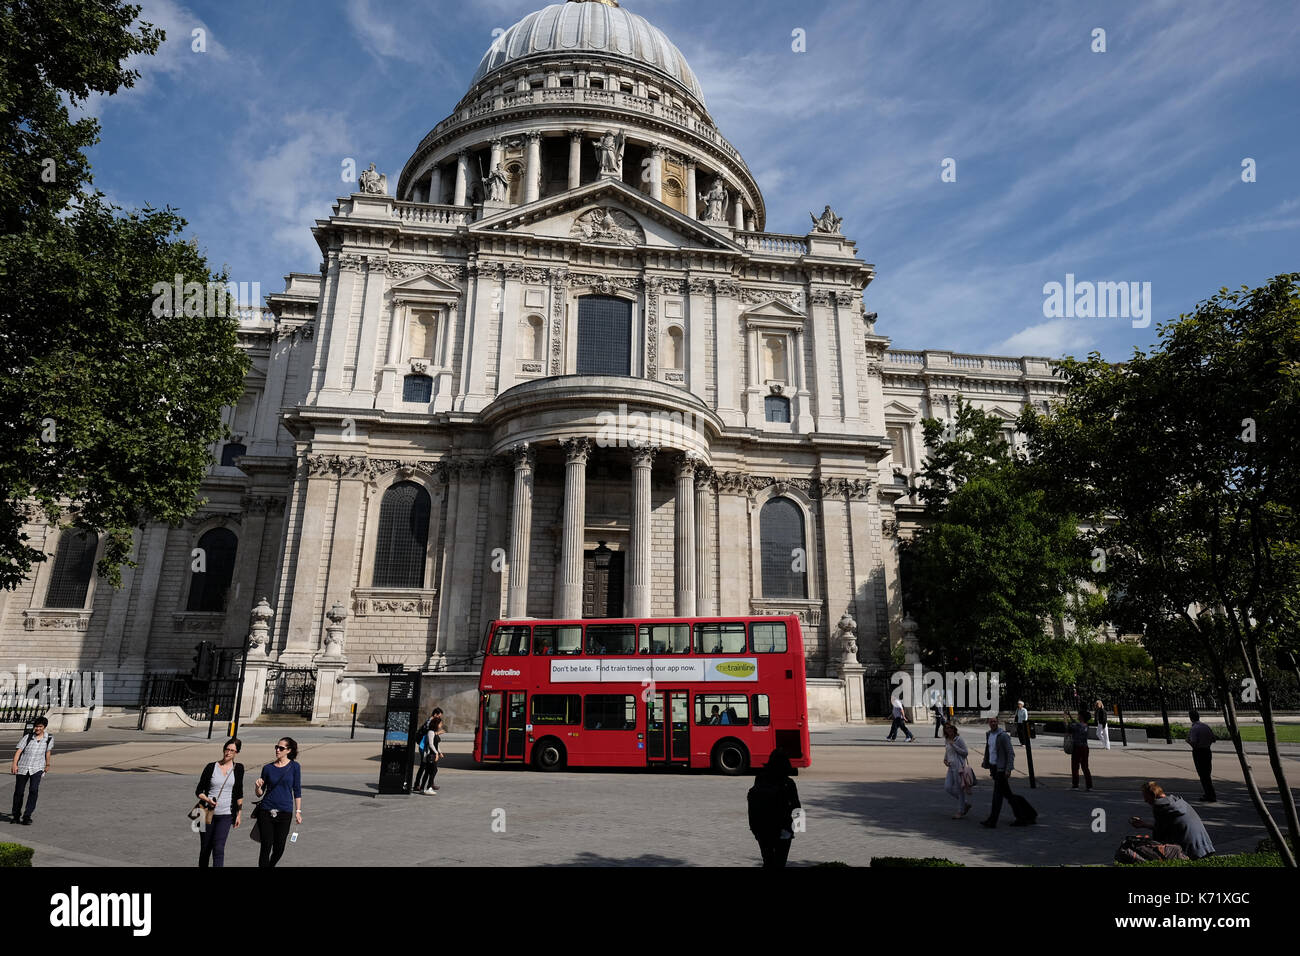 Iconic red Routemaster double-decker bus in front of the St. Paul's Cathedral, London, UK Stock Photo